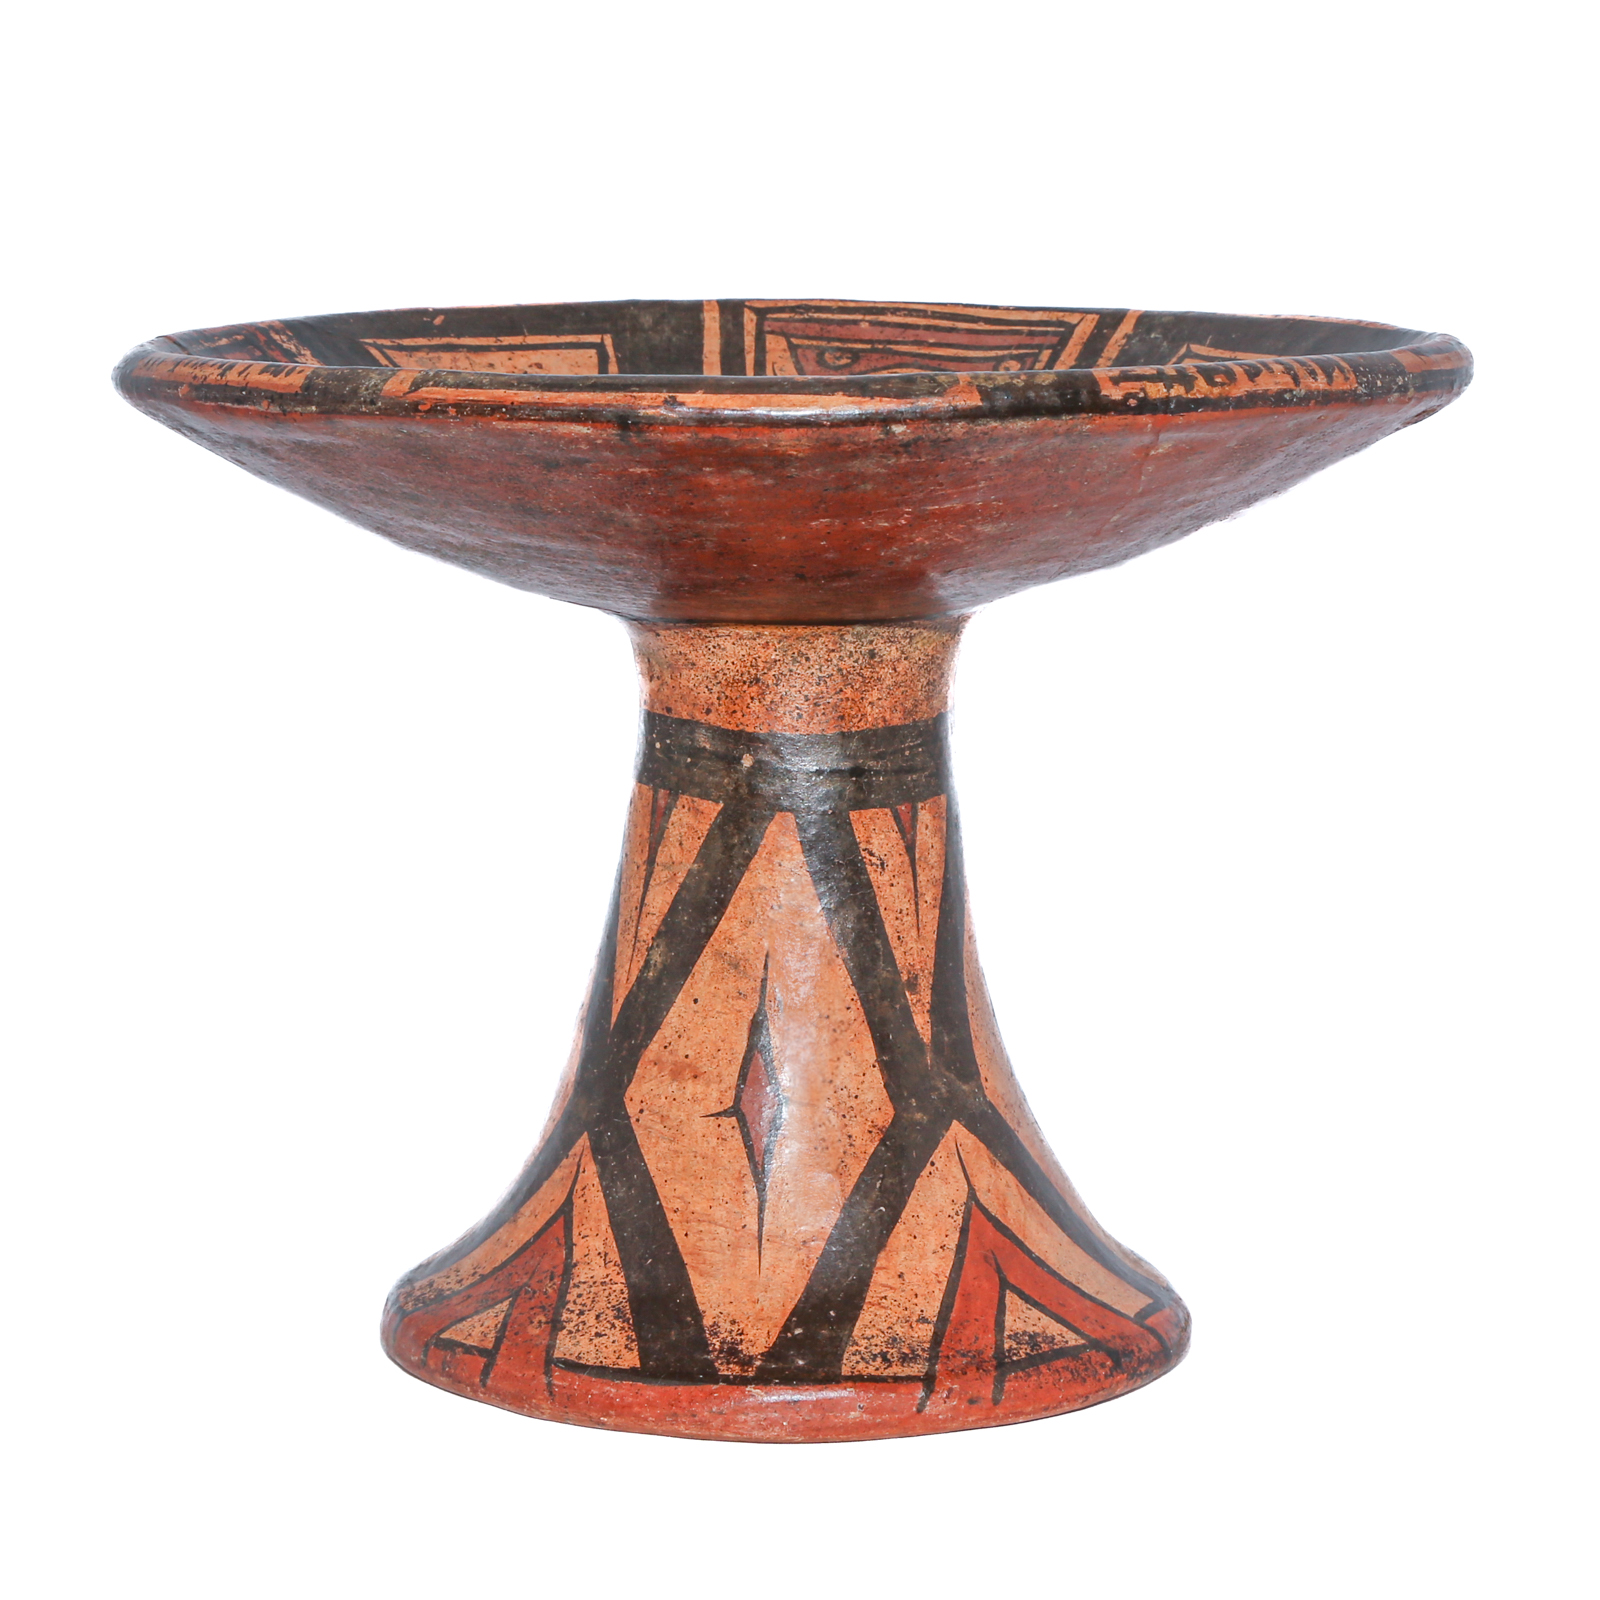 COCLE PAINTED EARTHENWARE PEDESTAL